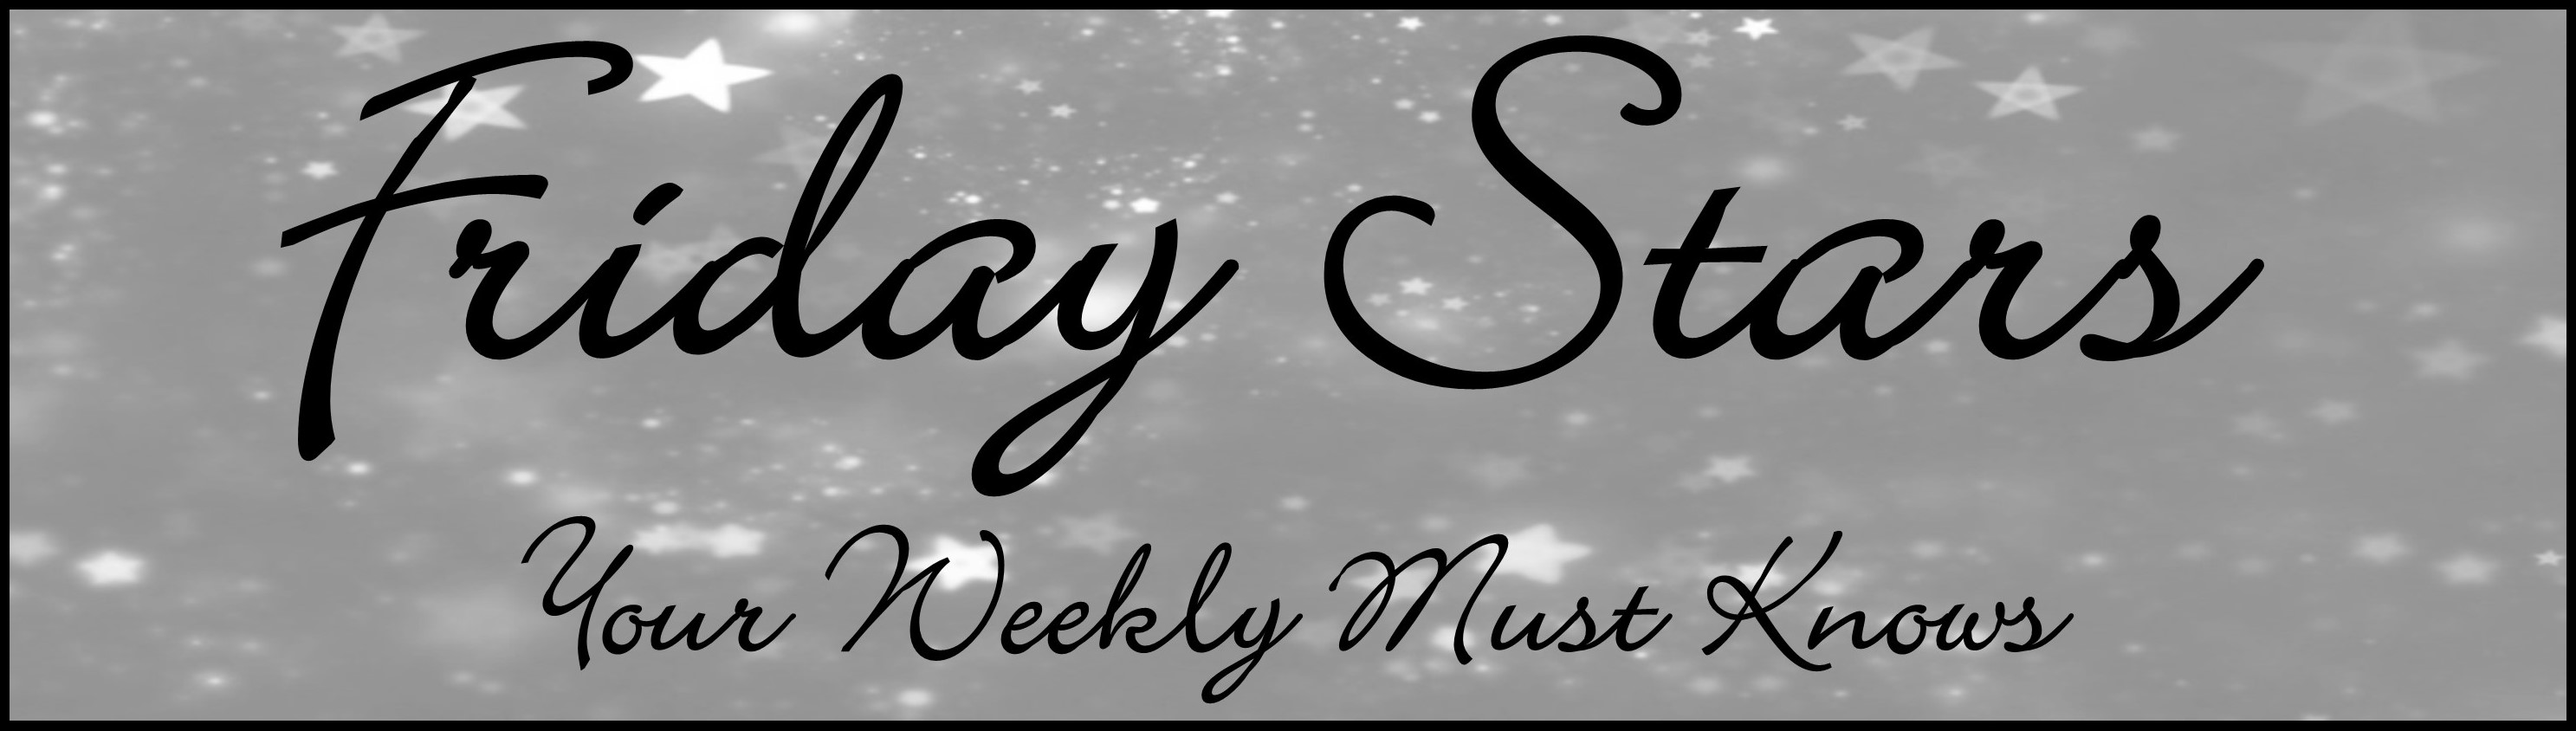 FRIDAY STARS – Your Weekly Must Knows 07/17/15